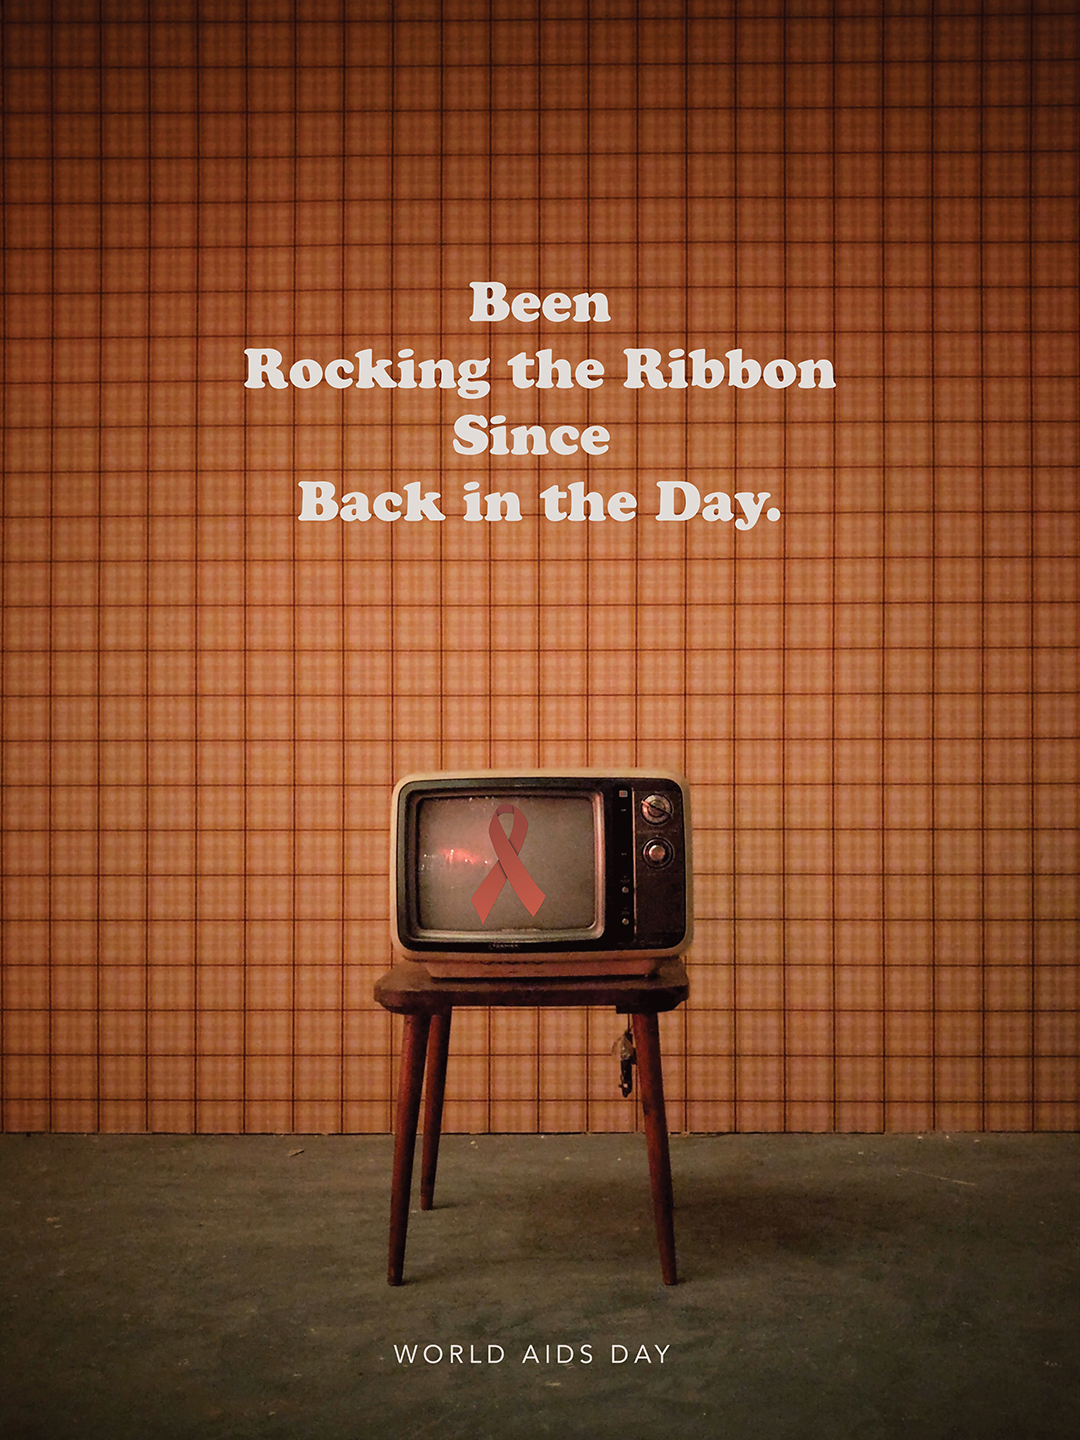 text reads: Been Rocking the Ribbon Since Back in the Day. There is an old-fashioned tv. There is a red ribbon on the tv screen